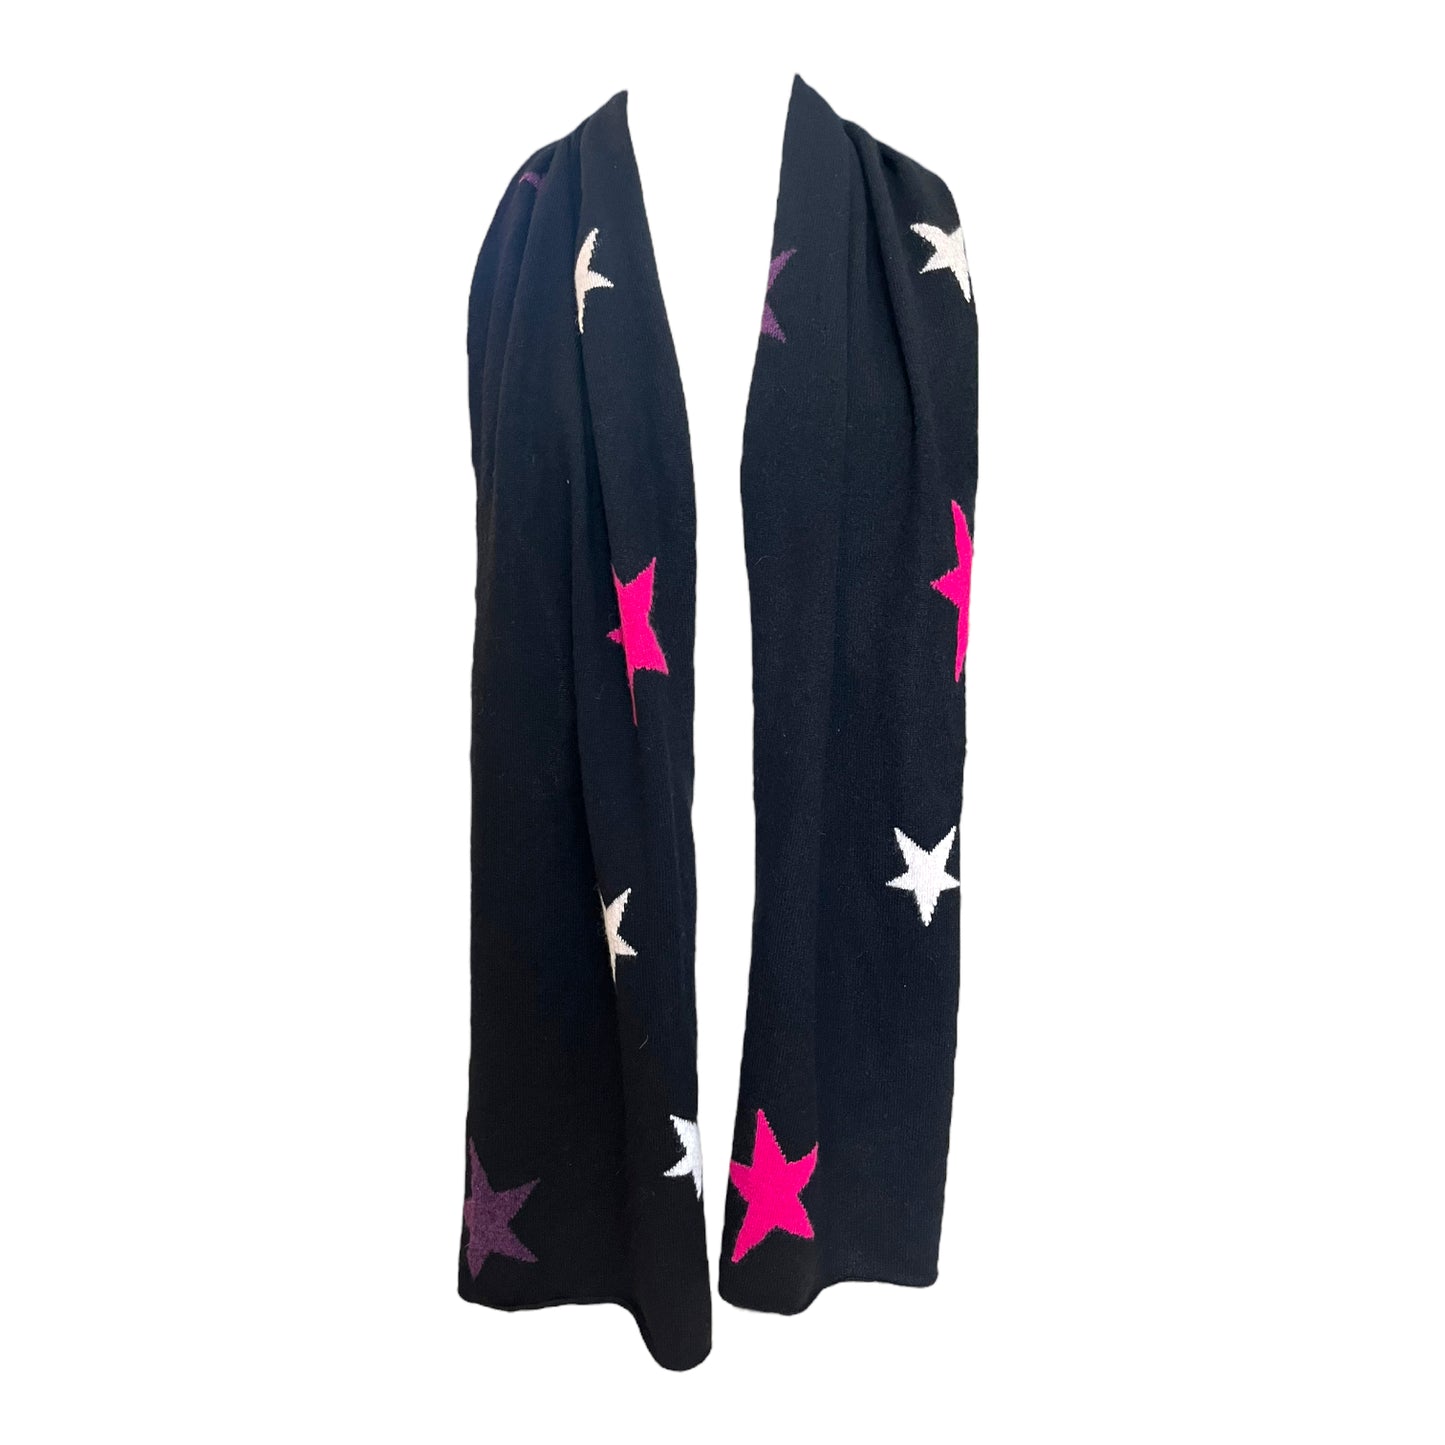 NEW Autograph Black and Pink Star Cashmere Scarf